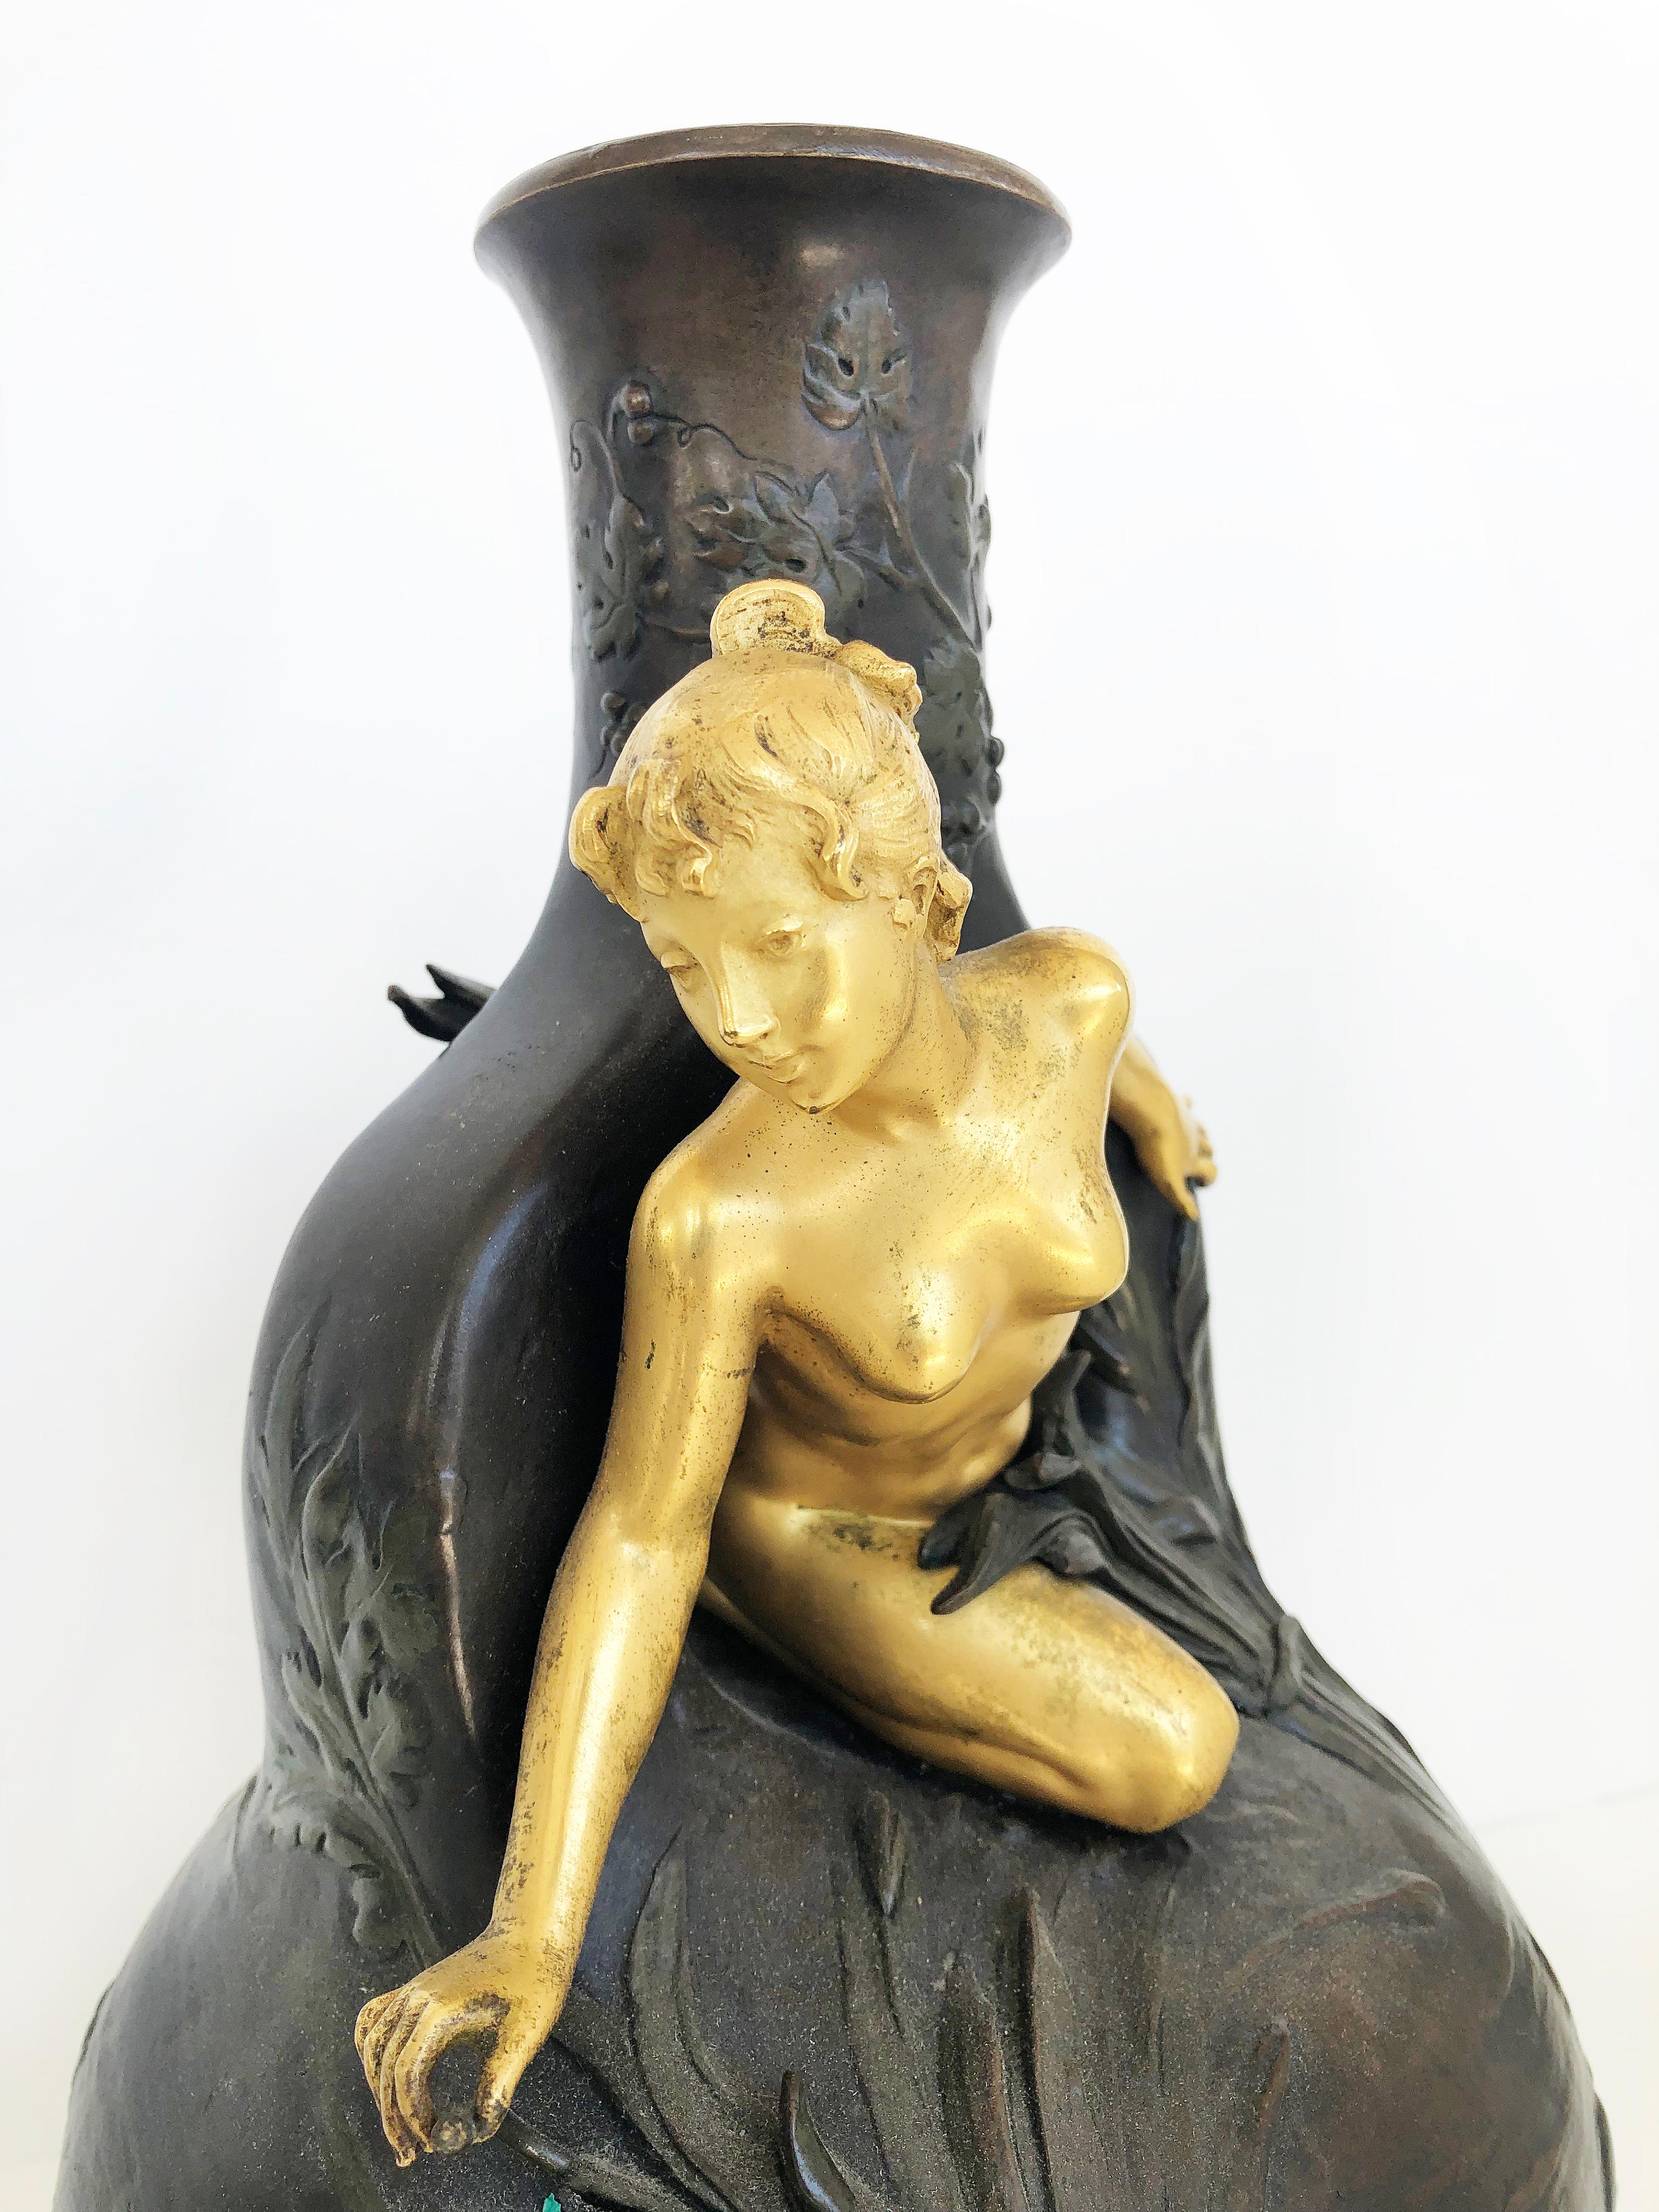 Charles Georges Ferville-Suan Art Nouveau bronze vase sculpture

Offered for sale is a Charles Georges Ferville-Suan (French, 1847-1925) bronze sculpture vase depicting a nude maiden nymph coming out of the water between large leaves. This is a